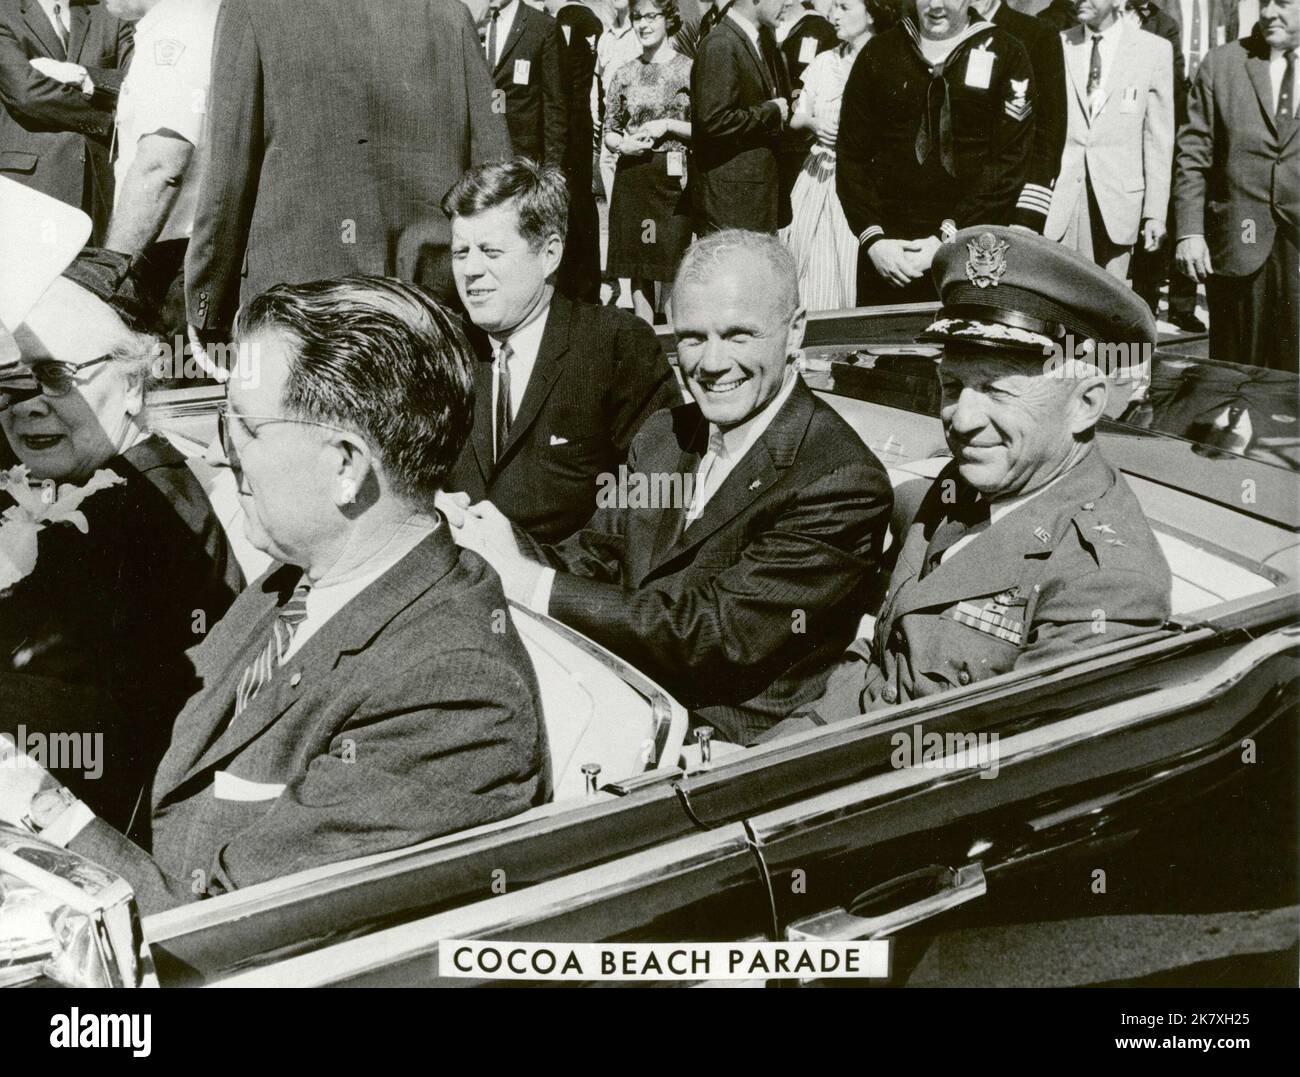 President John F. Kennedy, astronaut John Glenn and General Leighton I. Davis ride together during a parade in Cocoa Beach, Fla., after Glenn's historic first U.S. orbital spacefight. Stock Photo